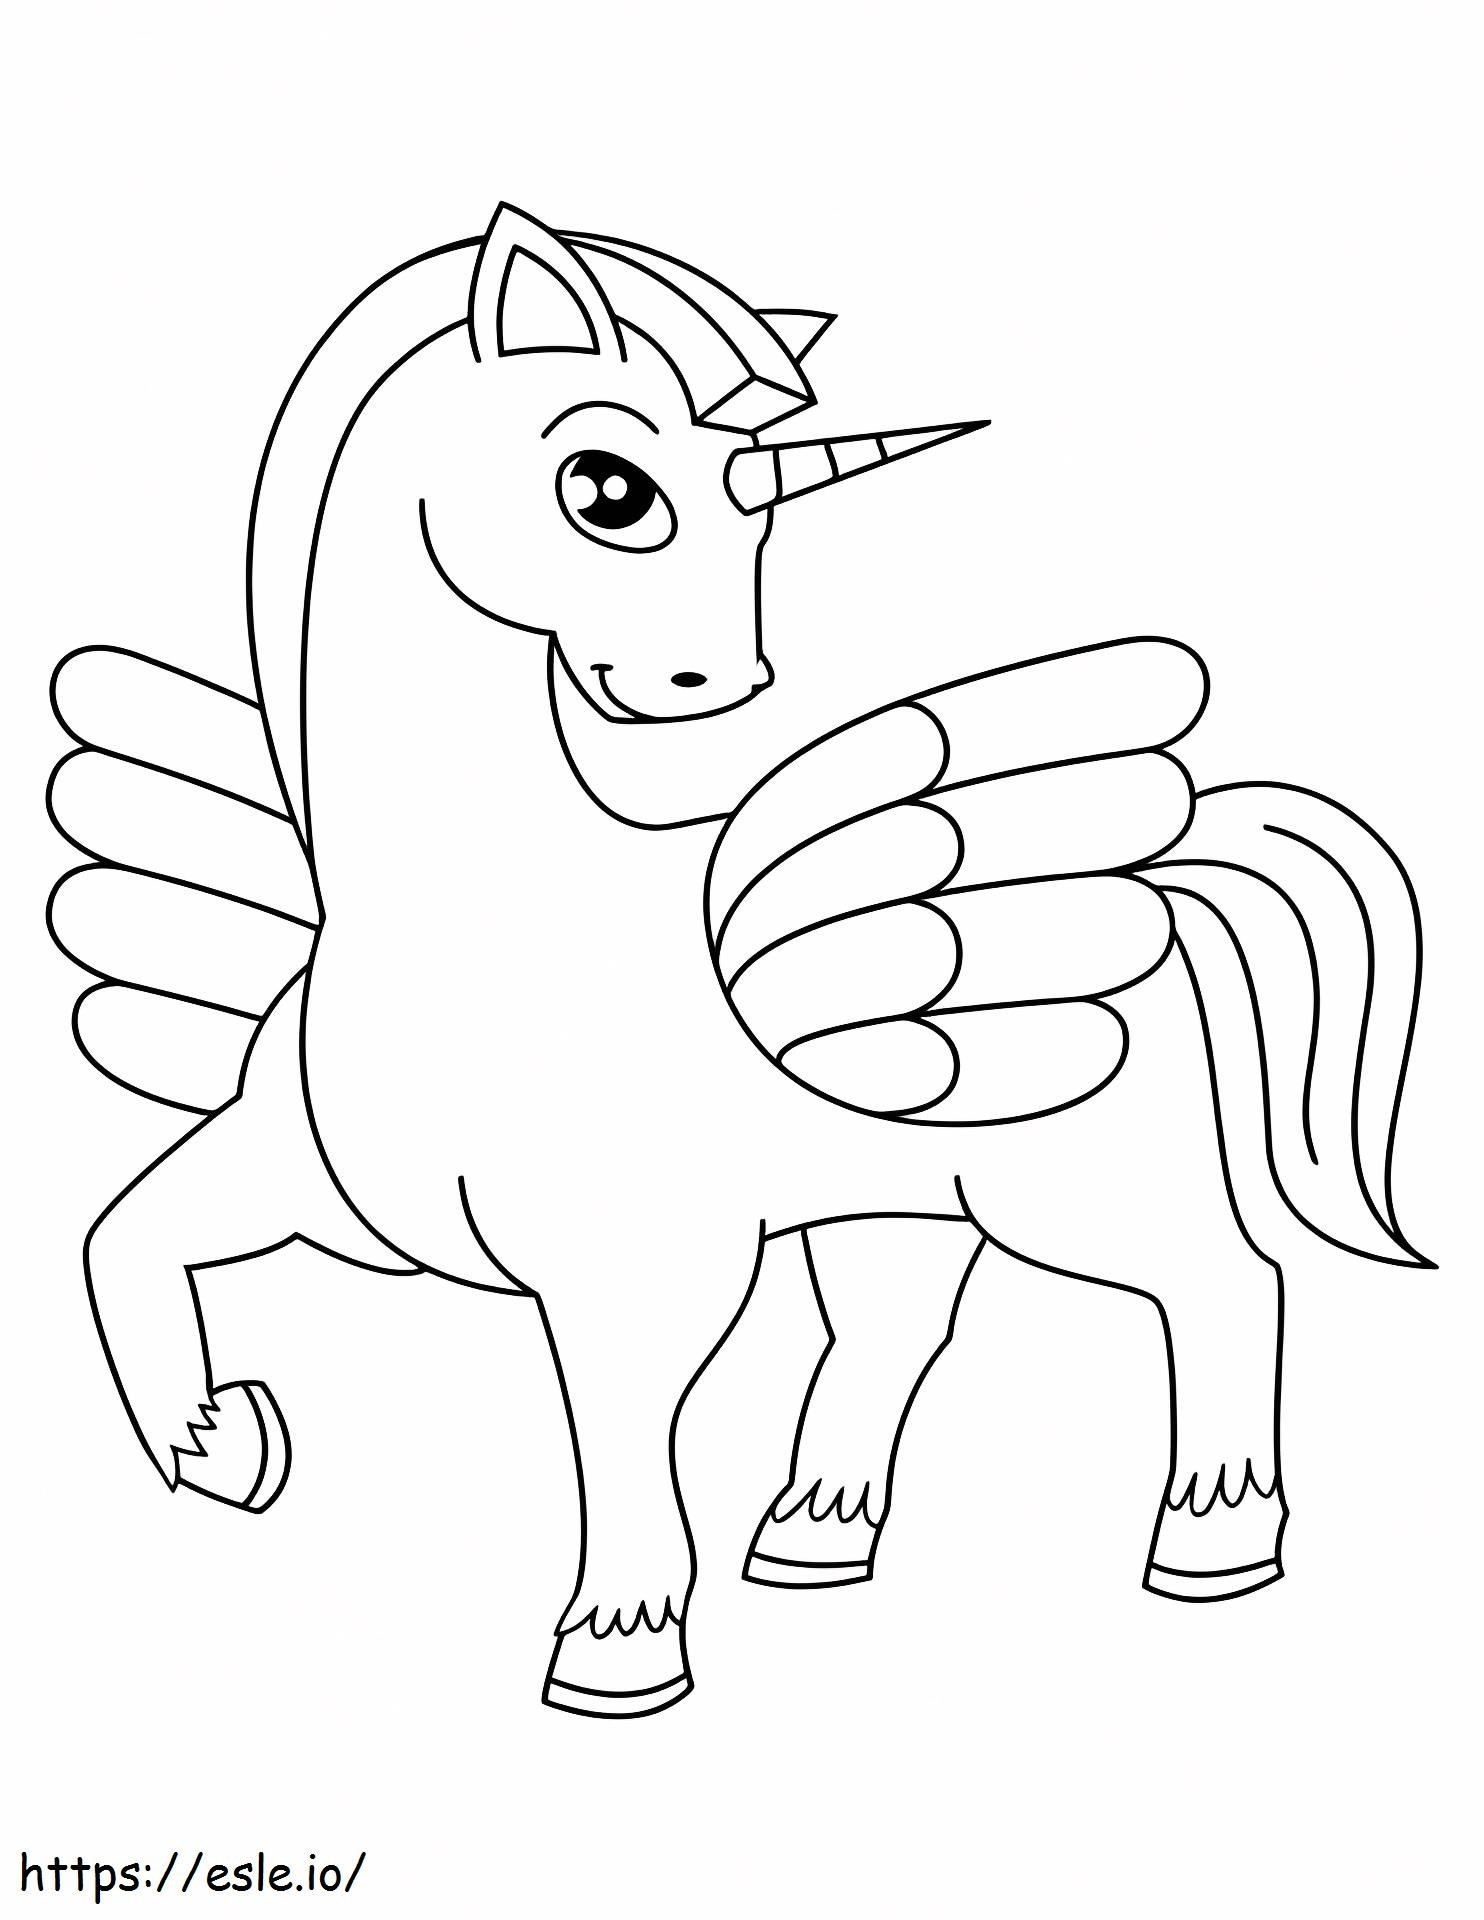 Little Winged Unicorn coloring page